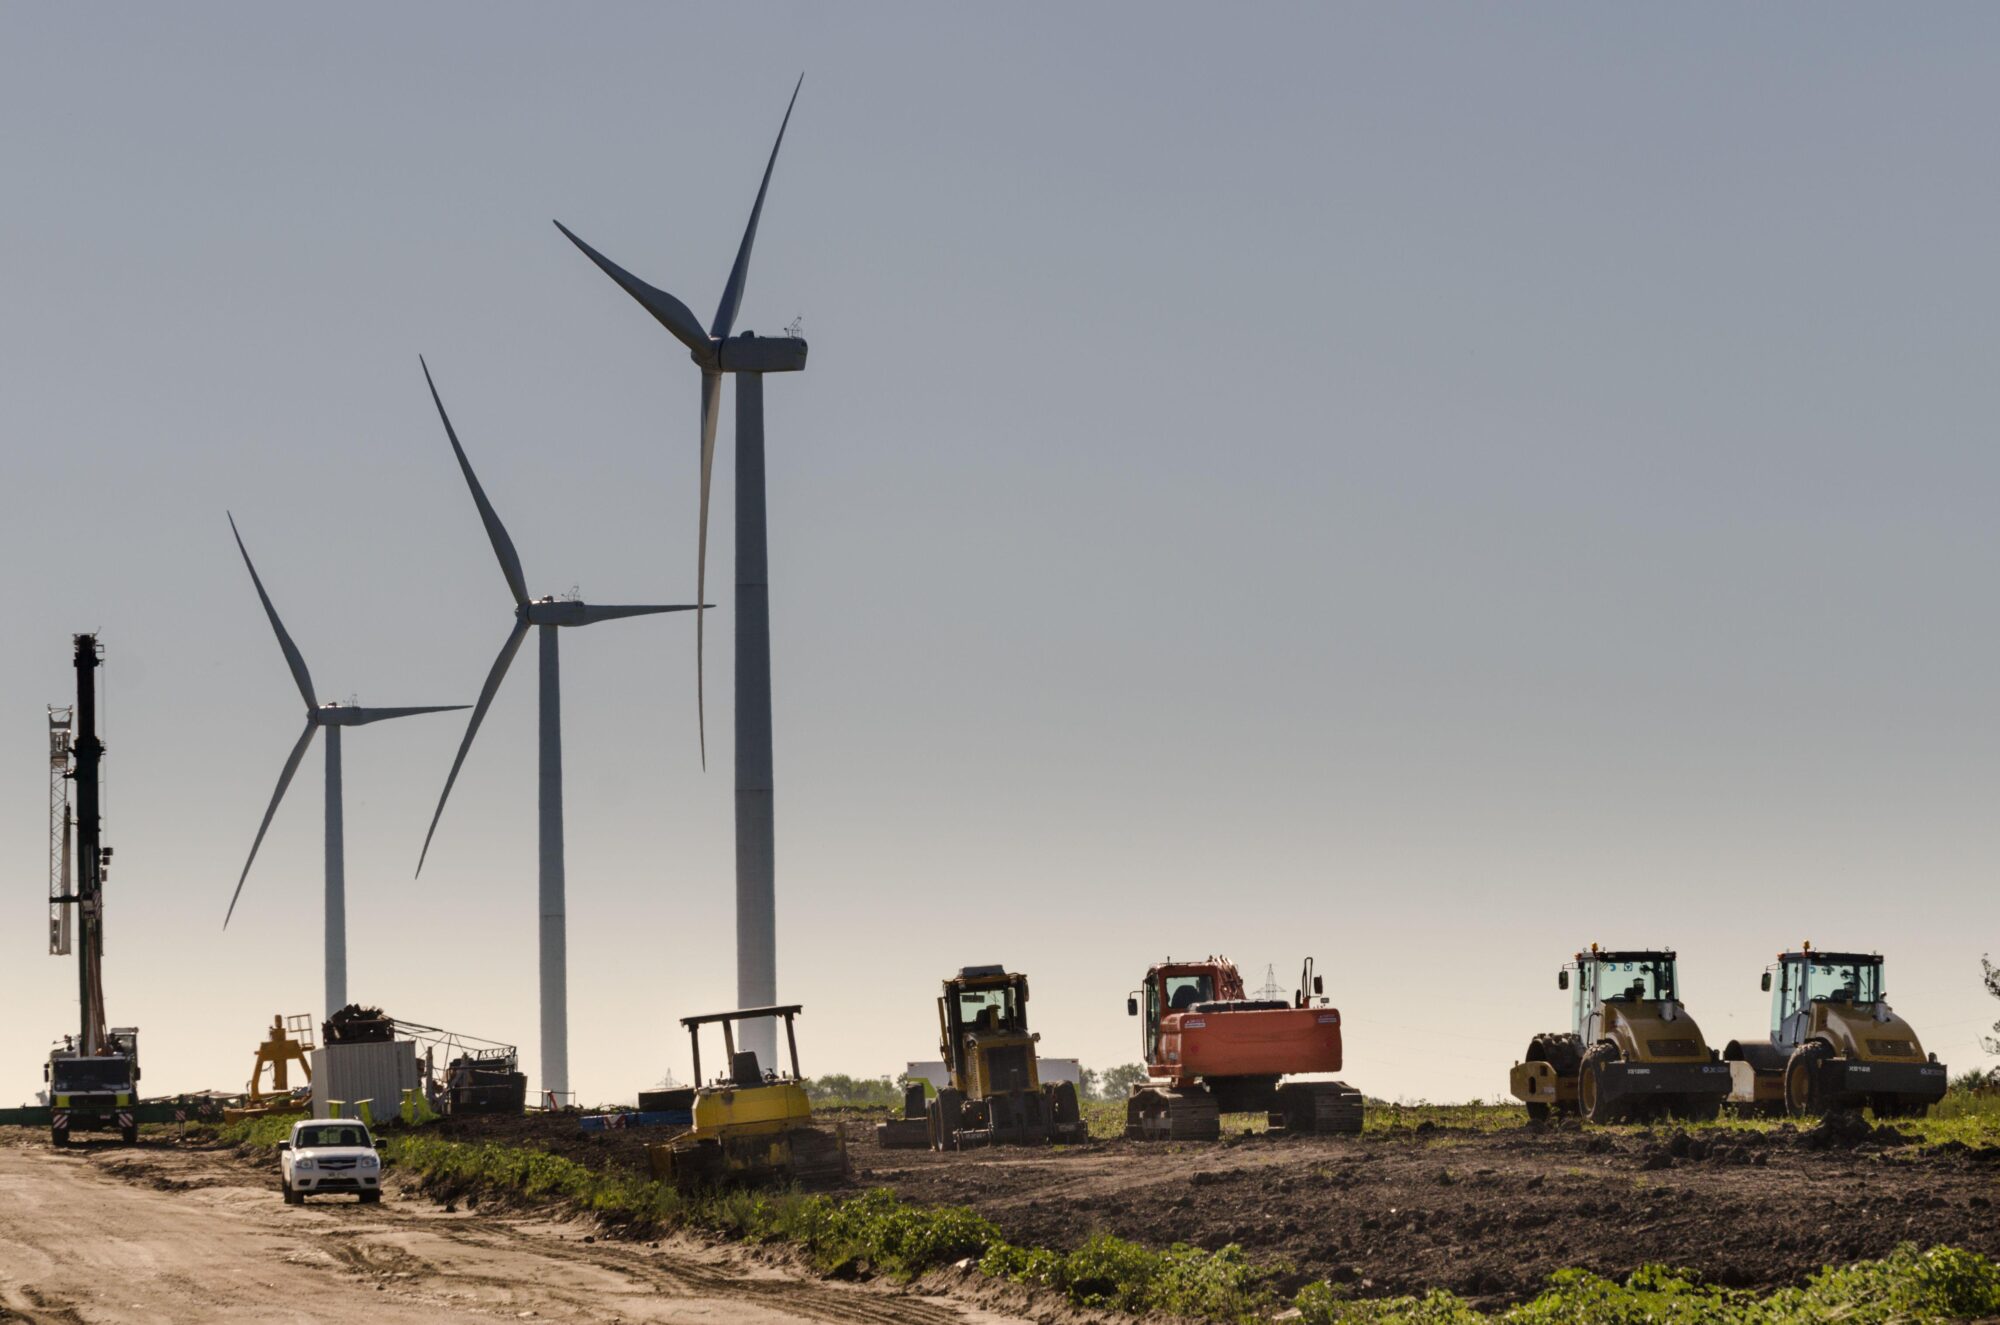 <p>Construction of wind turbines near Tarariras, in Uruguay&#8217;s Colonia department. Nearly all of the nation&#8217;s electricity comes from renewable sources, but its government is exploring new financing instruments, such as a sovereign green bond, to help other sectors in the transition to net-zero (Image: Picardo Photography / Alamy)</p>